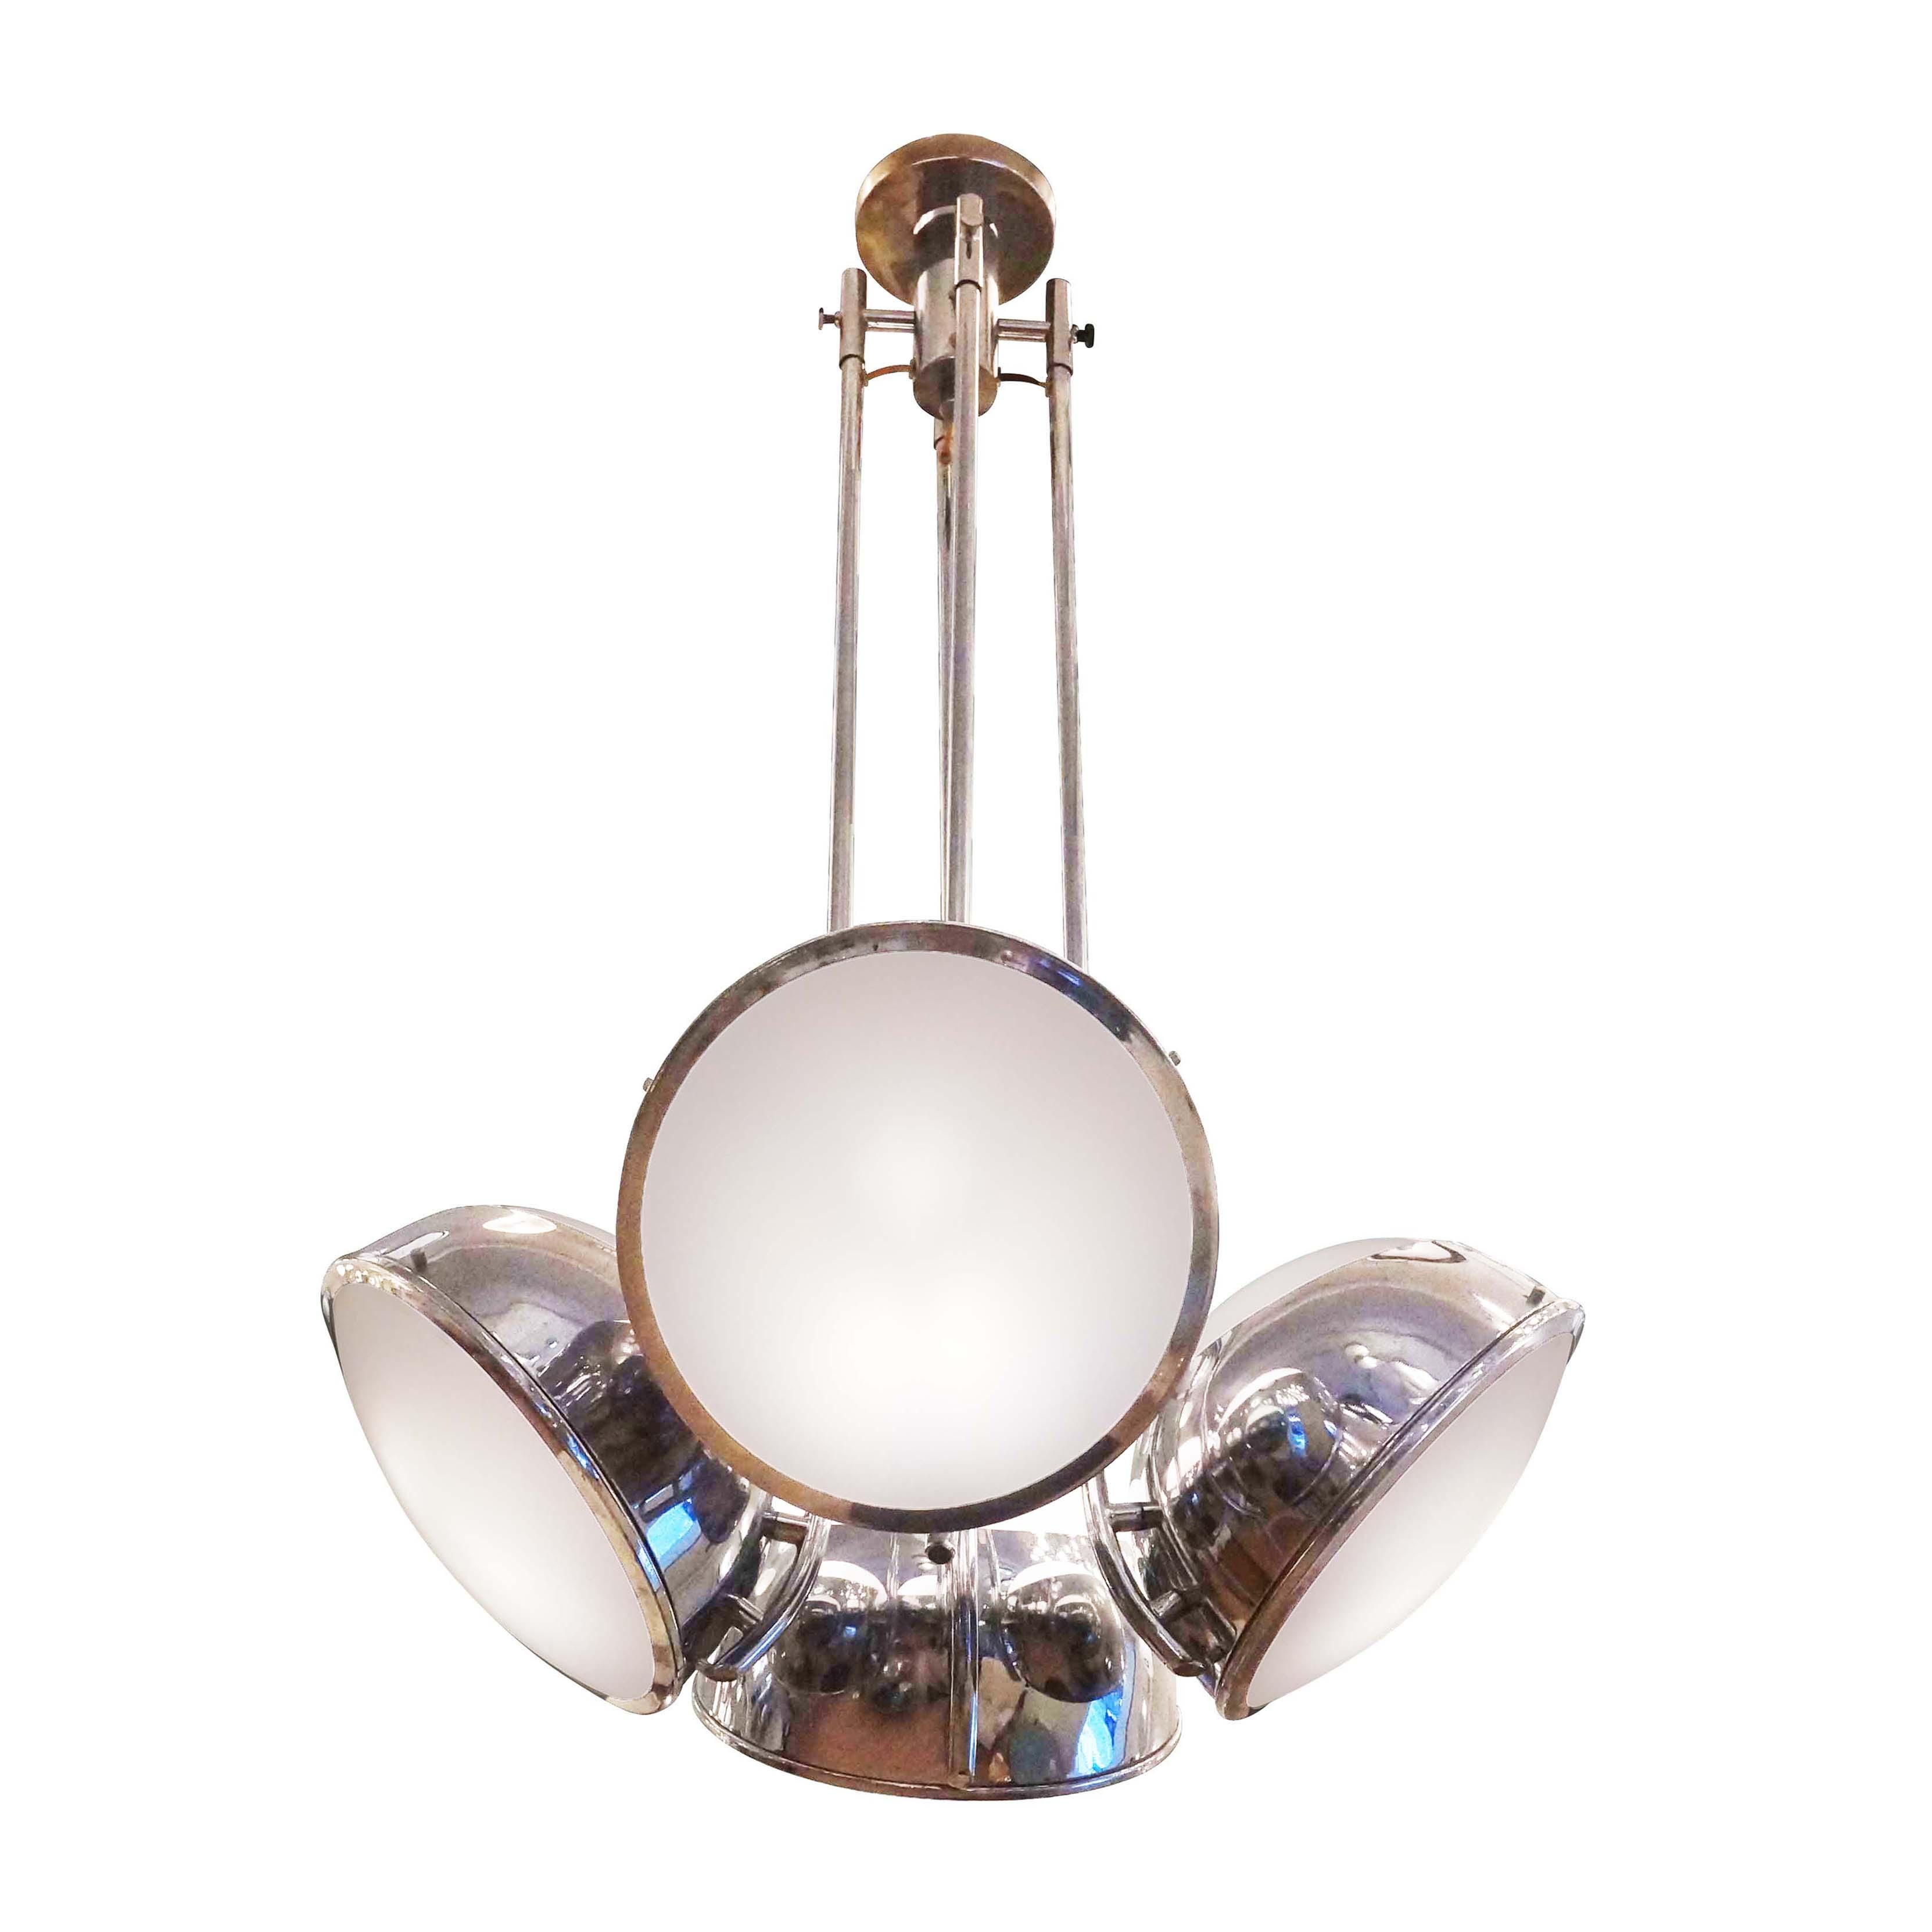 1960’s polished nickel chandelier by Reggiani. Four lights, each with two frosted glass diffusers.

Condition: Good vintage condition, minor wear consistent with age and use.

Diameter: 24”

Height: 42”

Ref#: LTZ2039